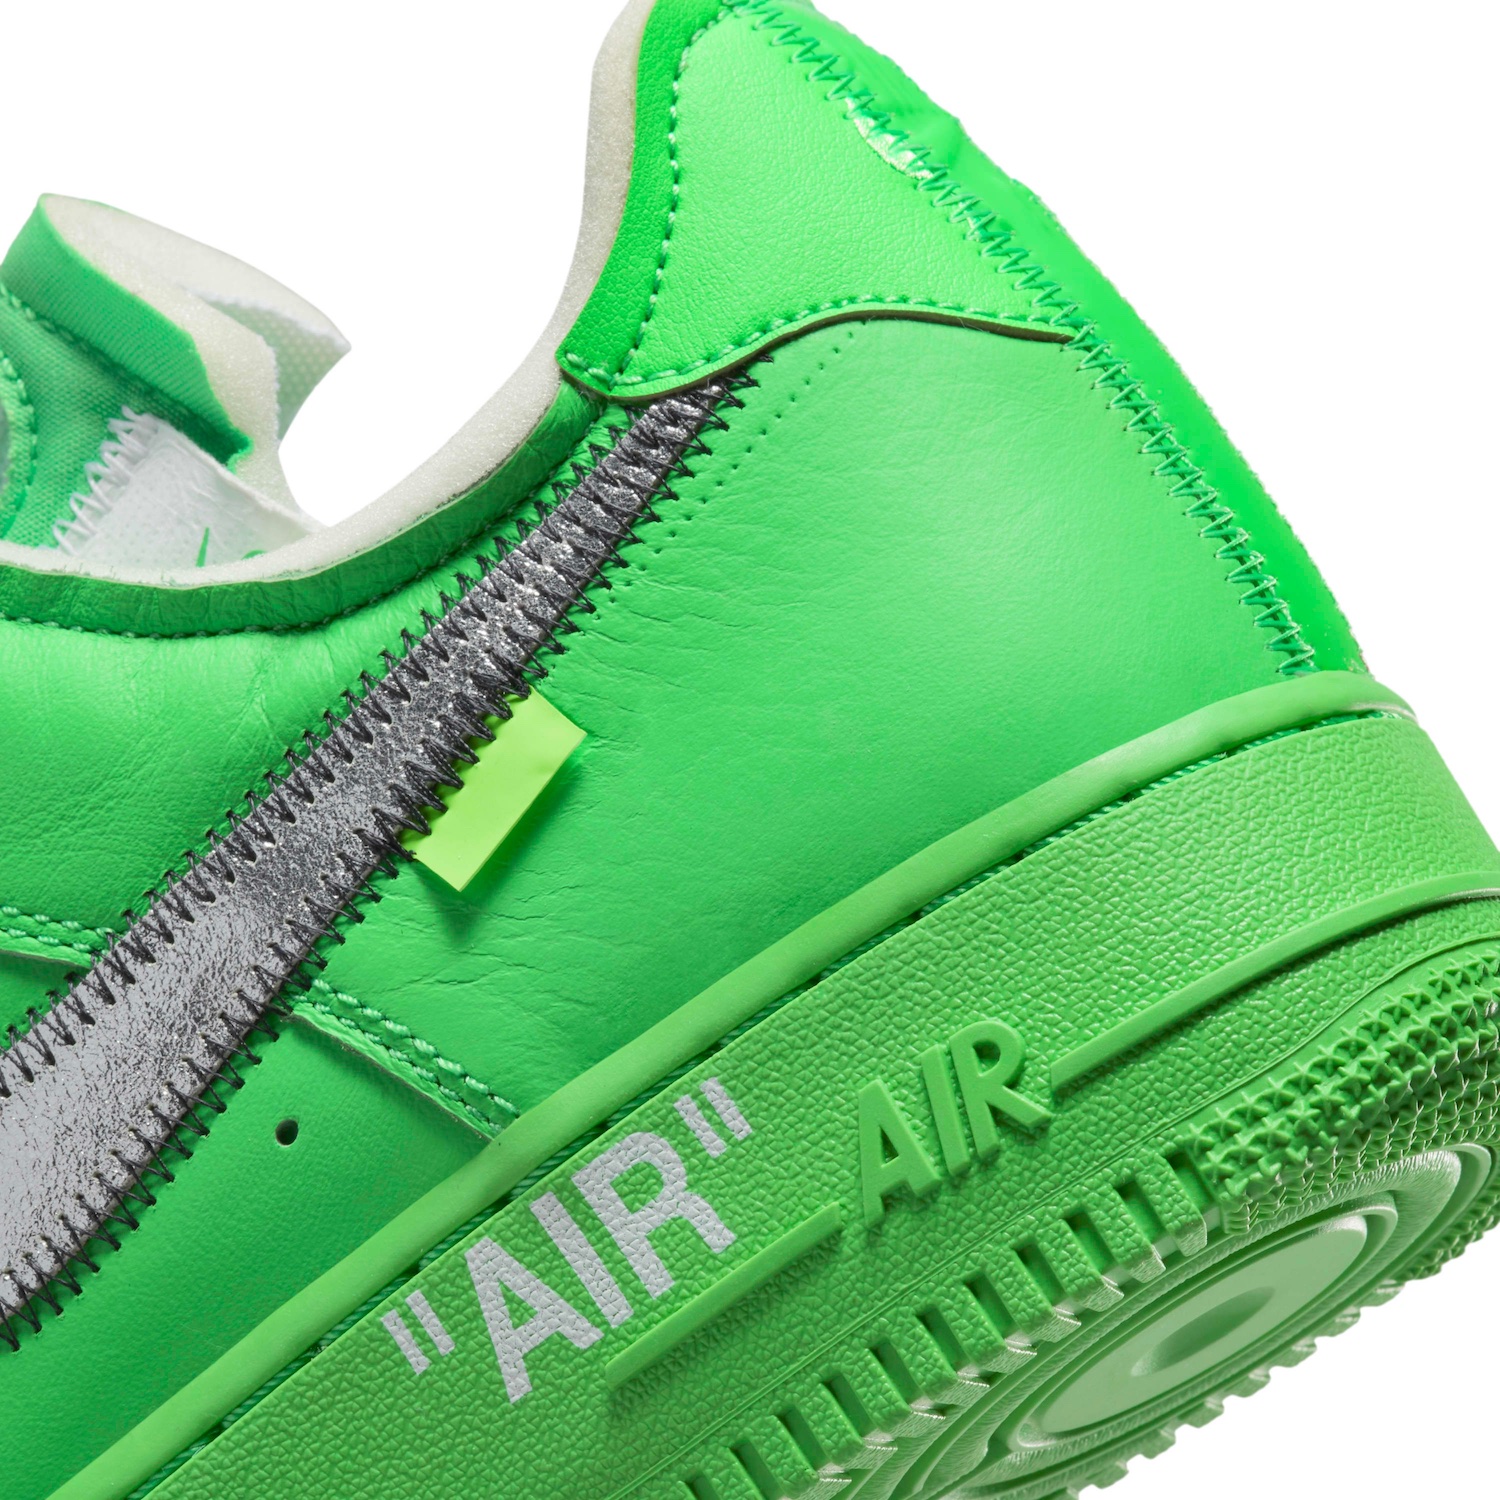 off-white-nike-air-force-1-sp-light-green-spark-brooklyn-museum-3.jpeg